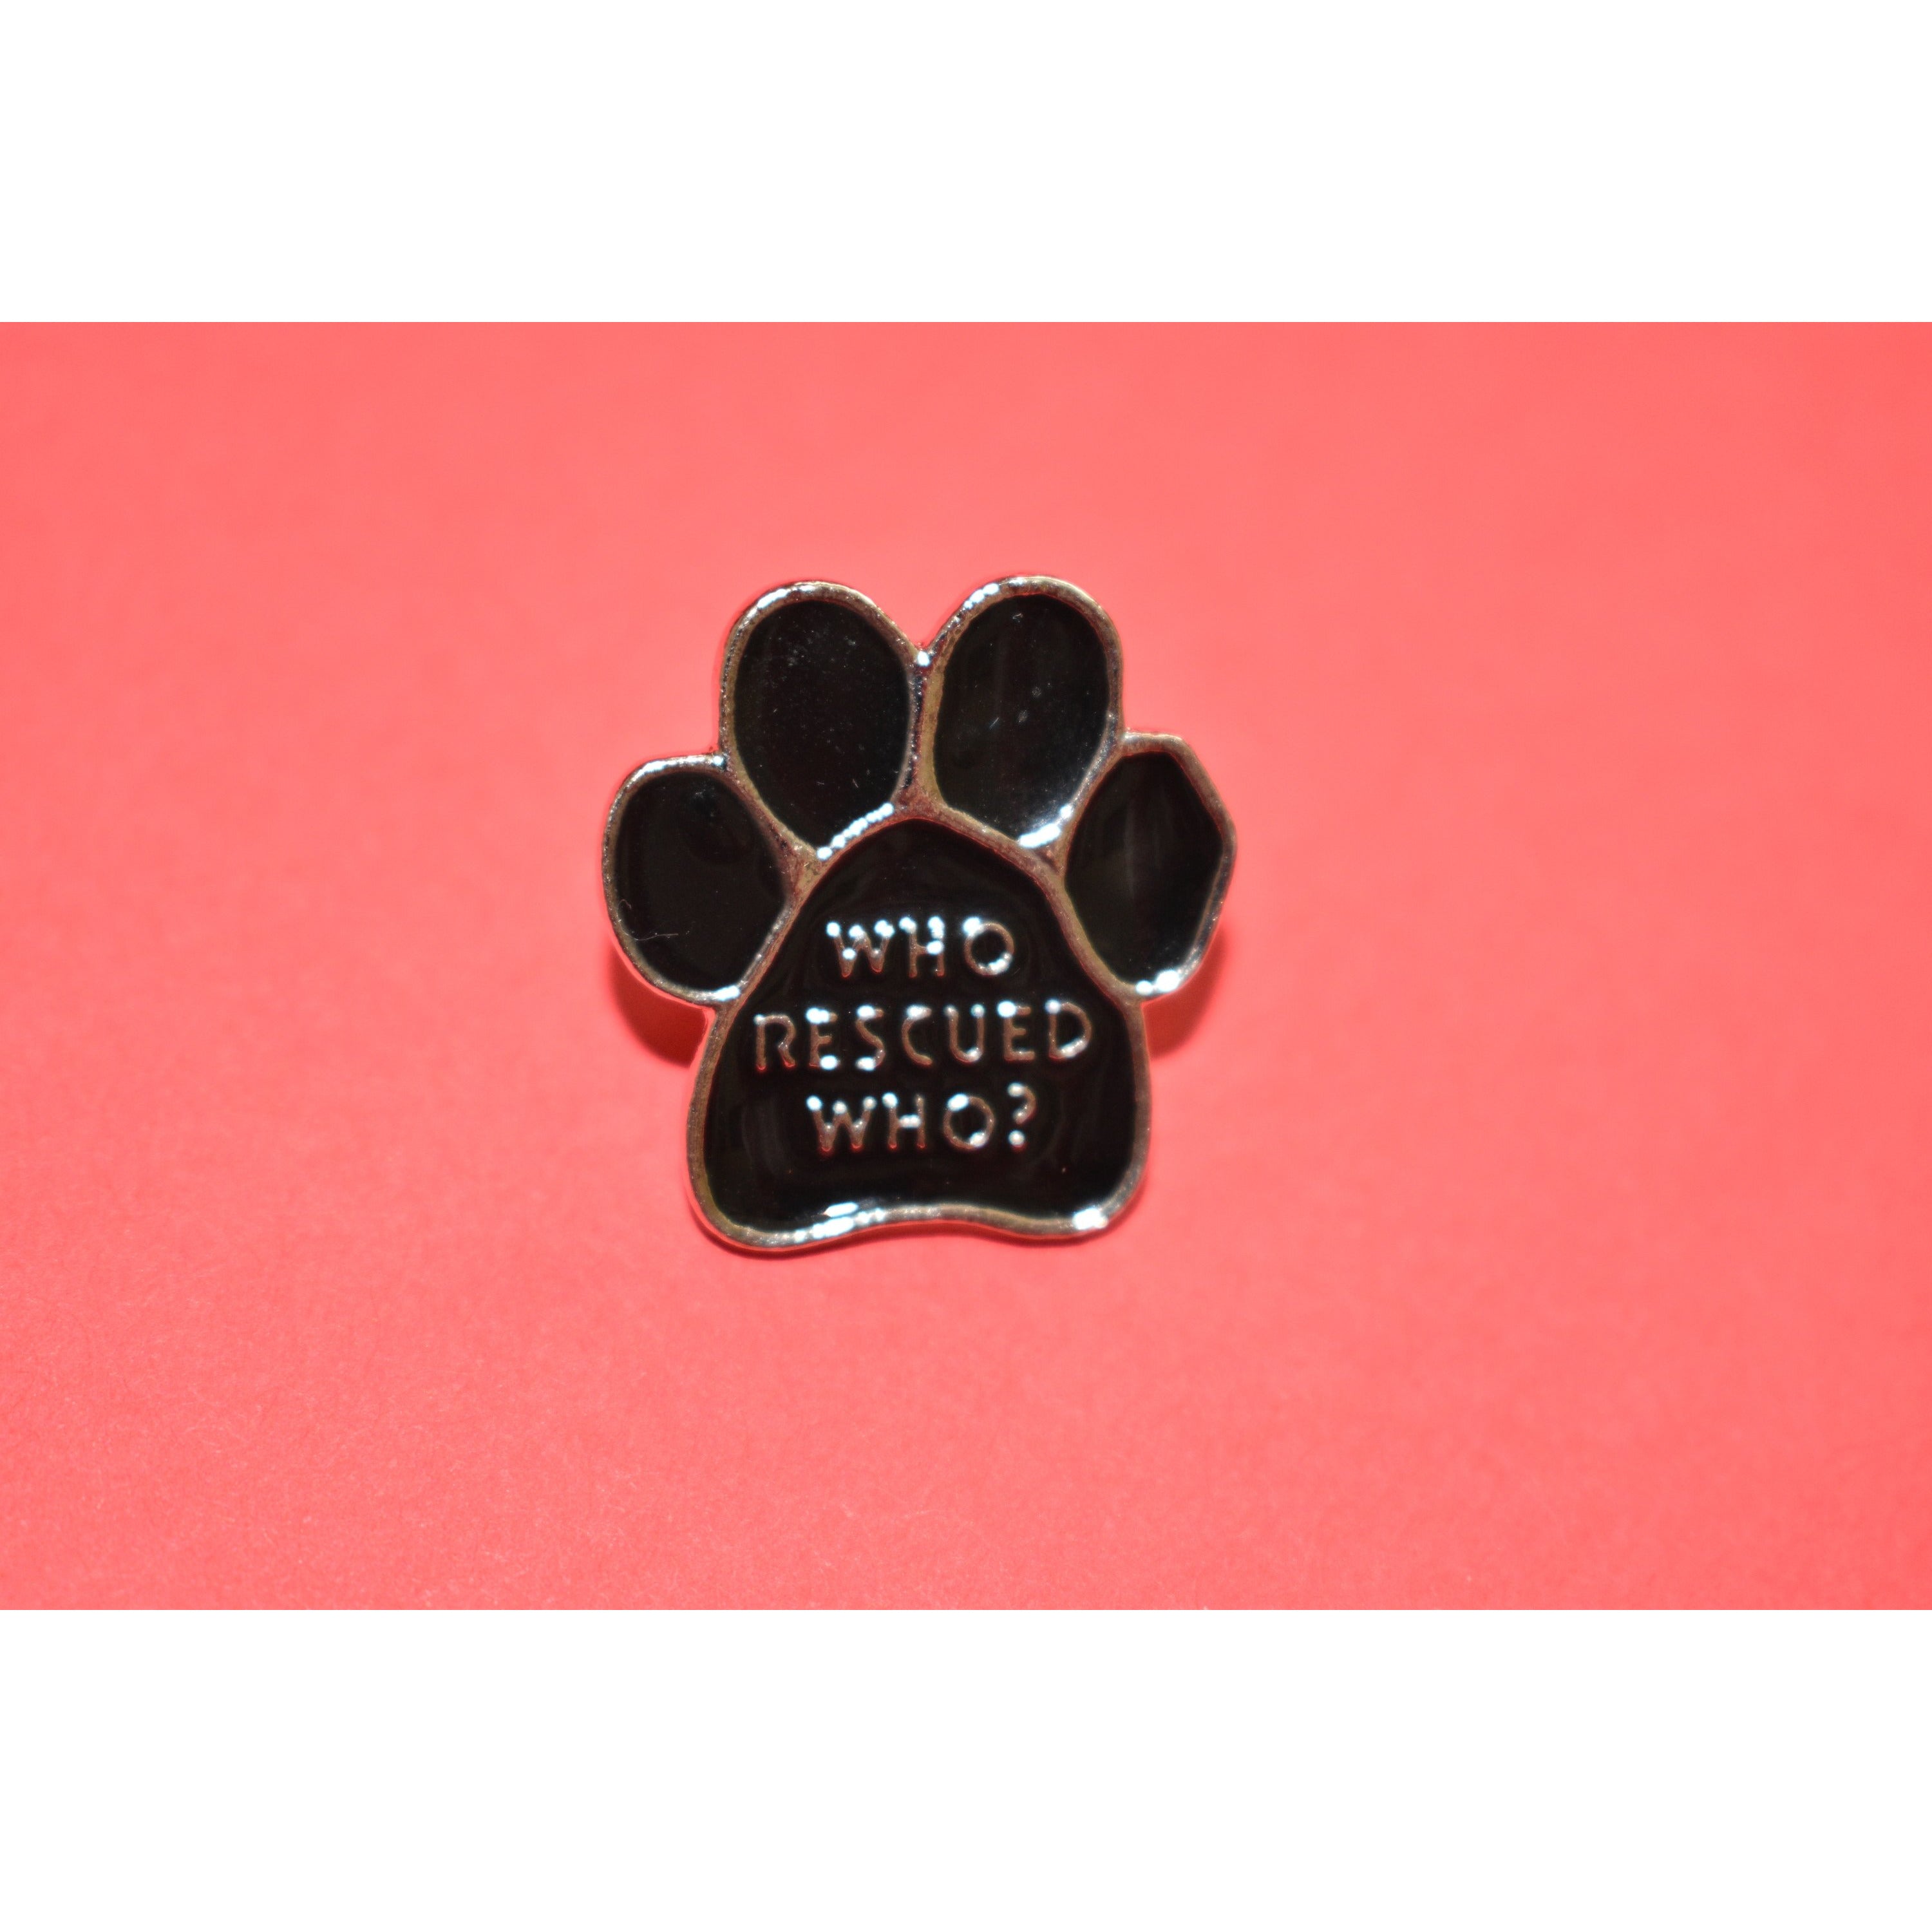 Who Rescued Who Enamel Pin - Dope Dog Co